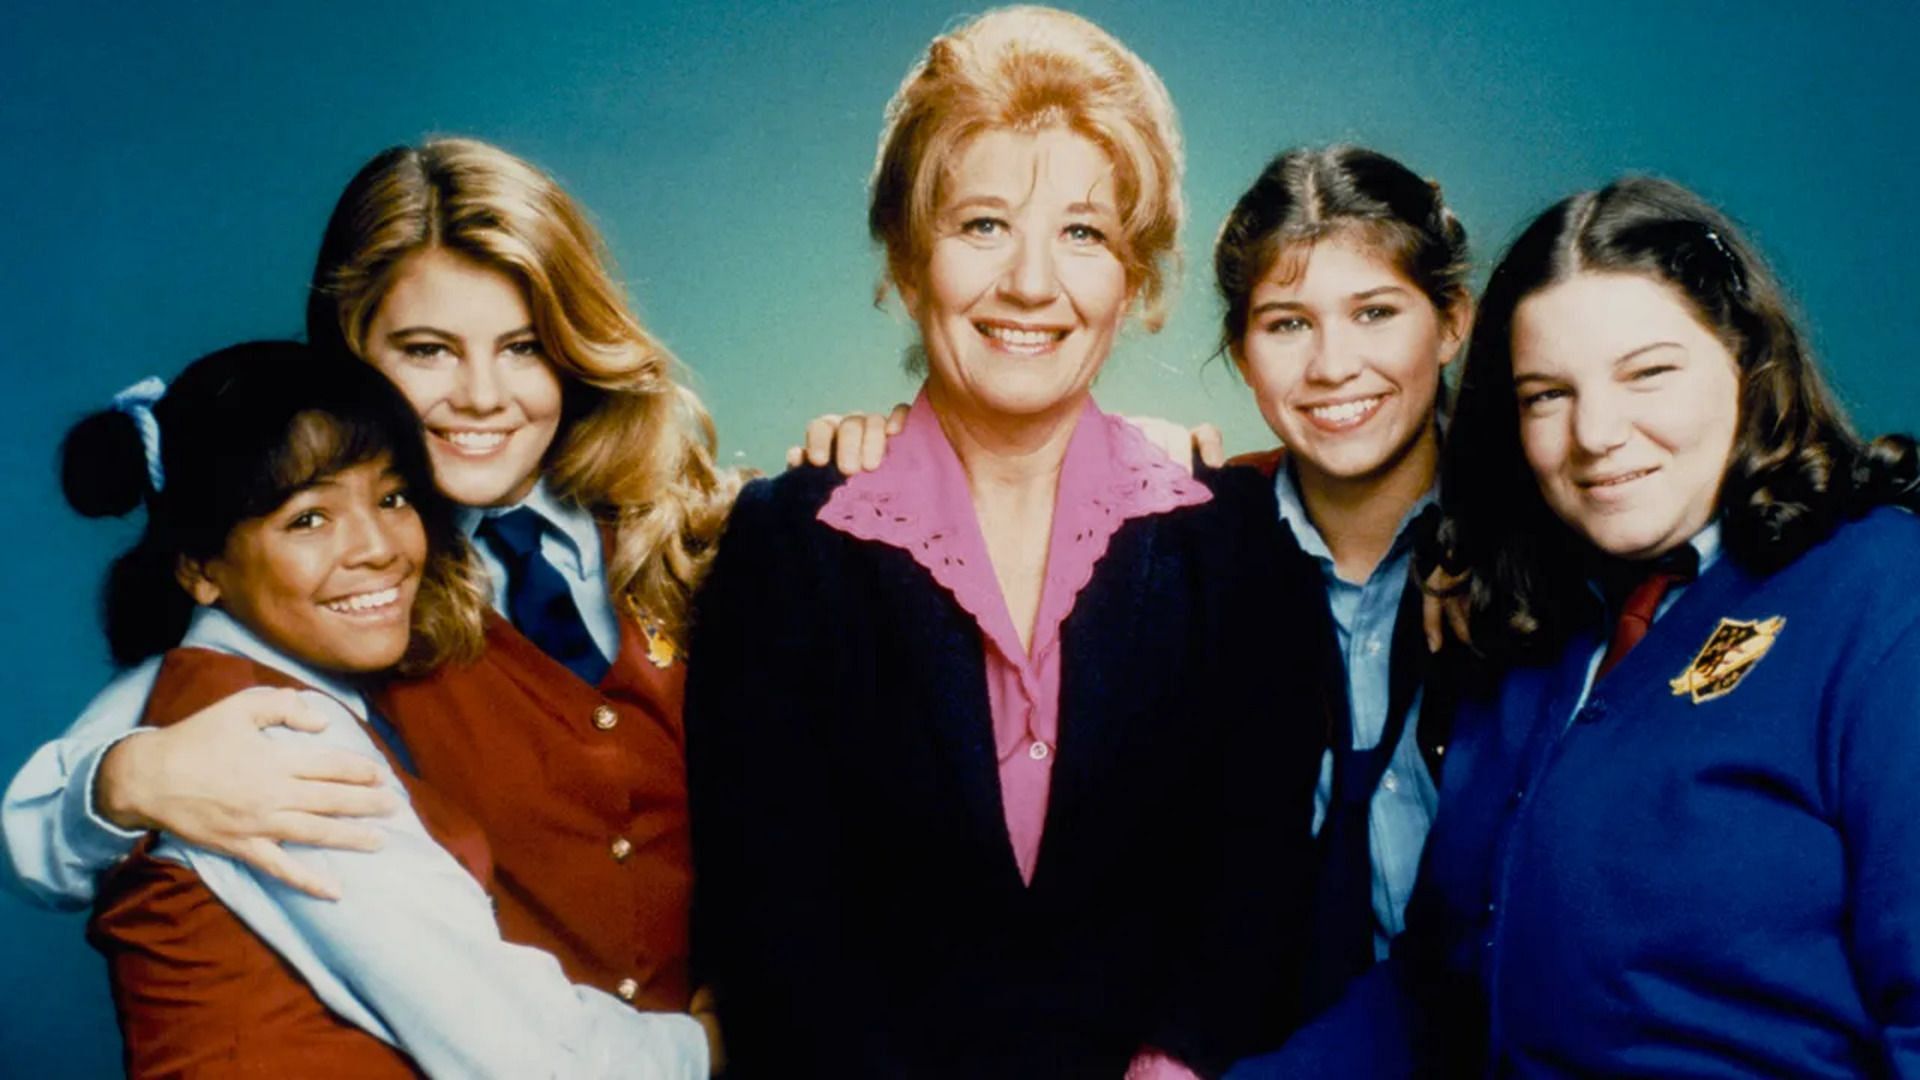 Facts of Life aired on NBC from 1979 to 1988 (Image via NBC)